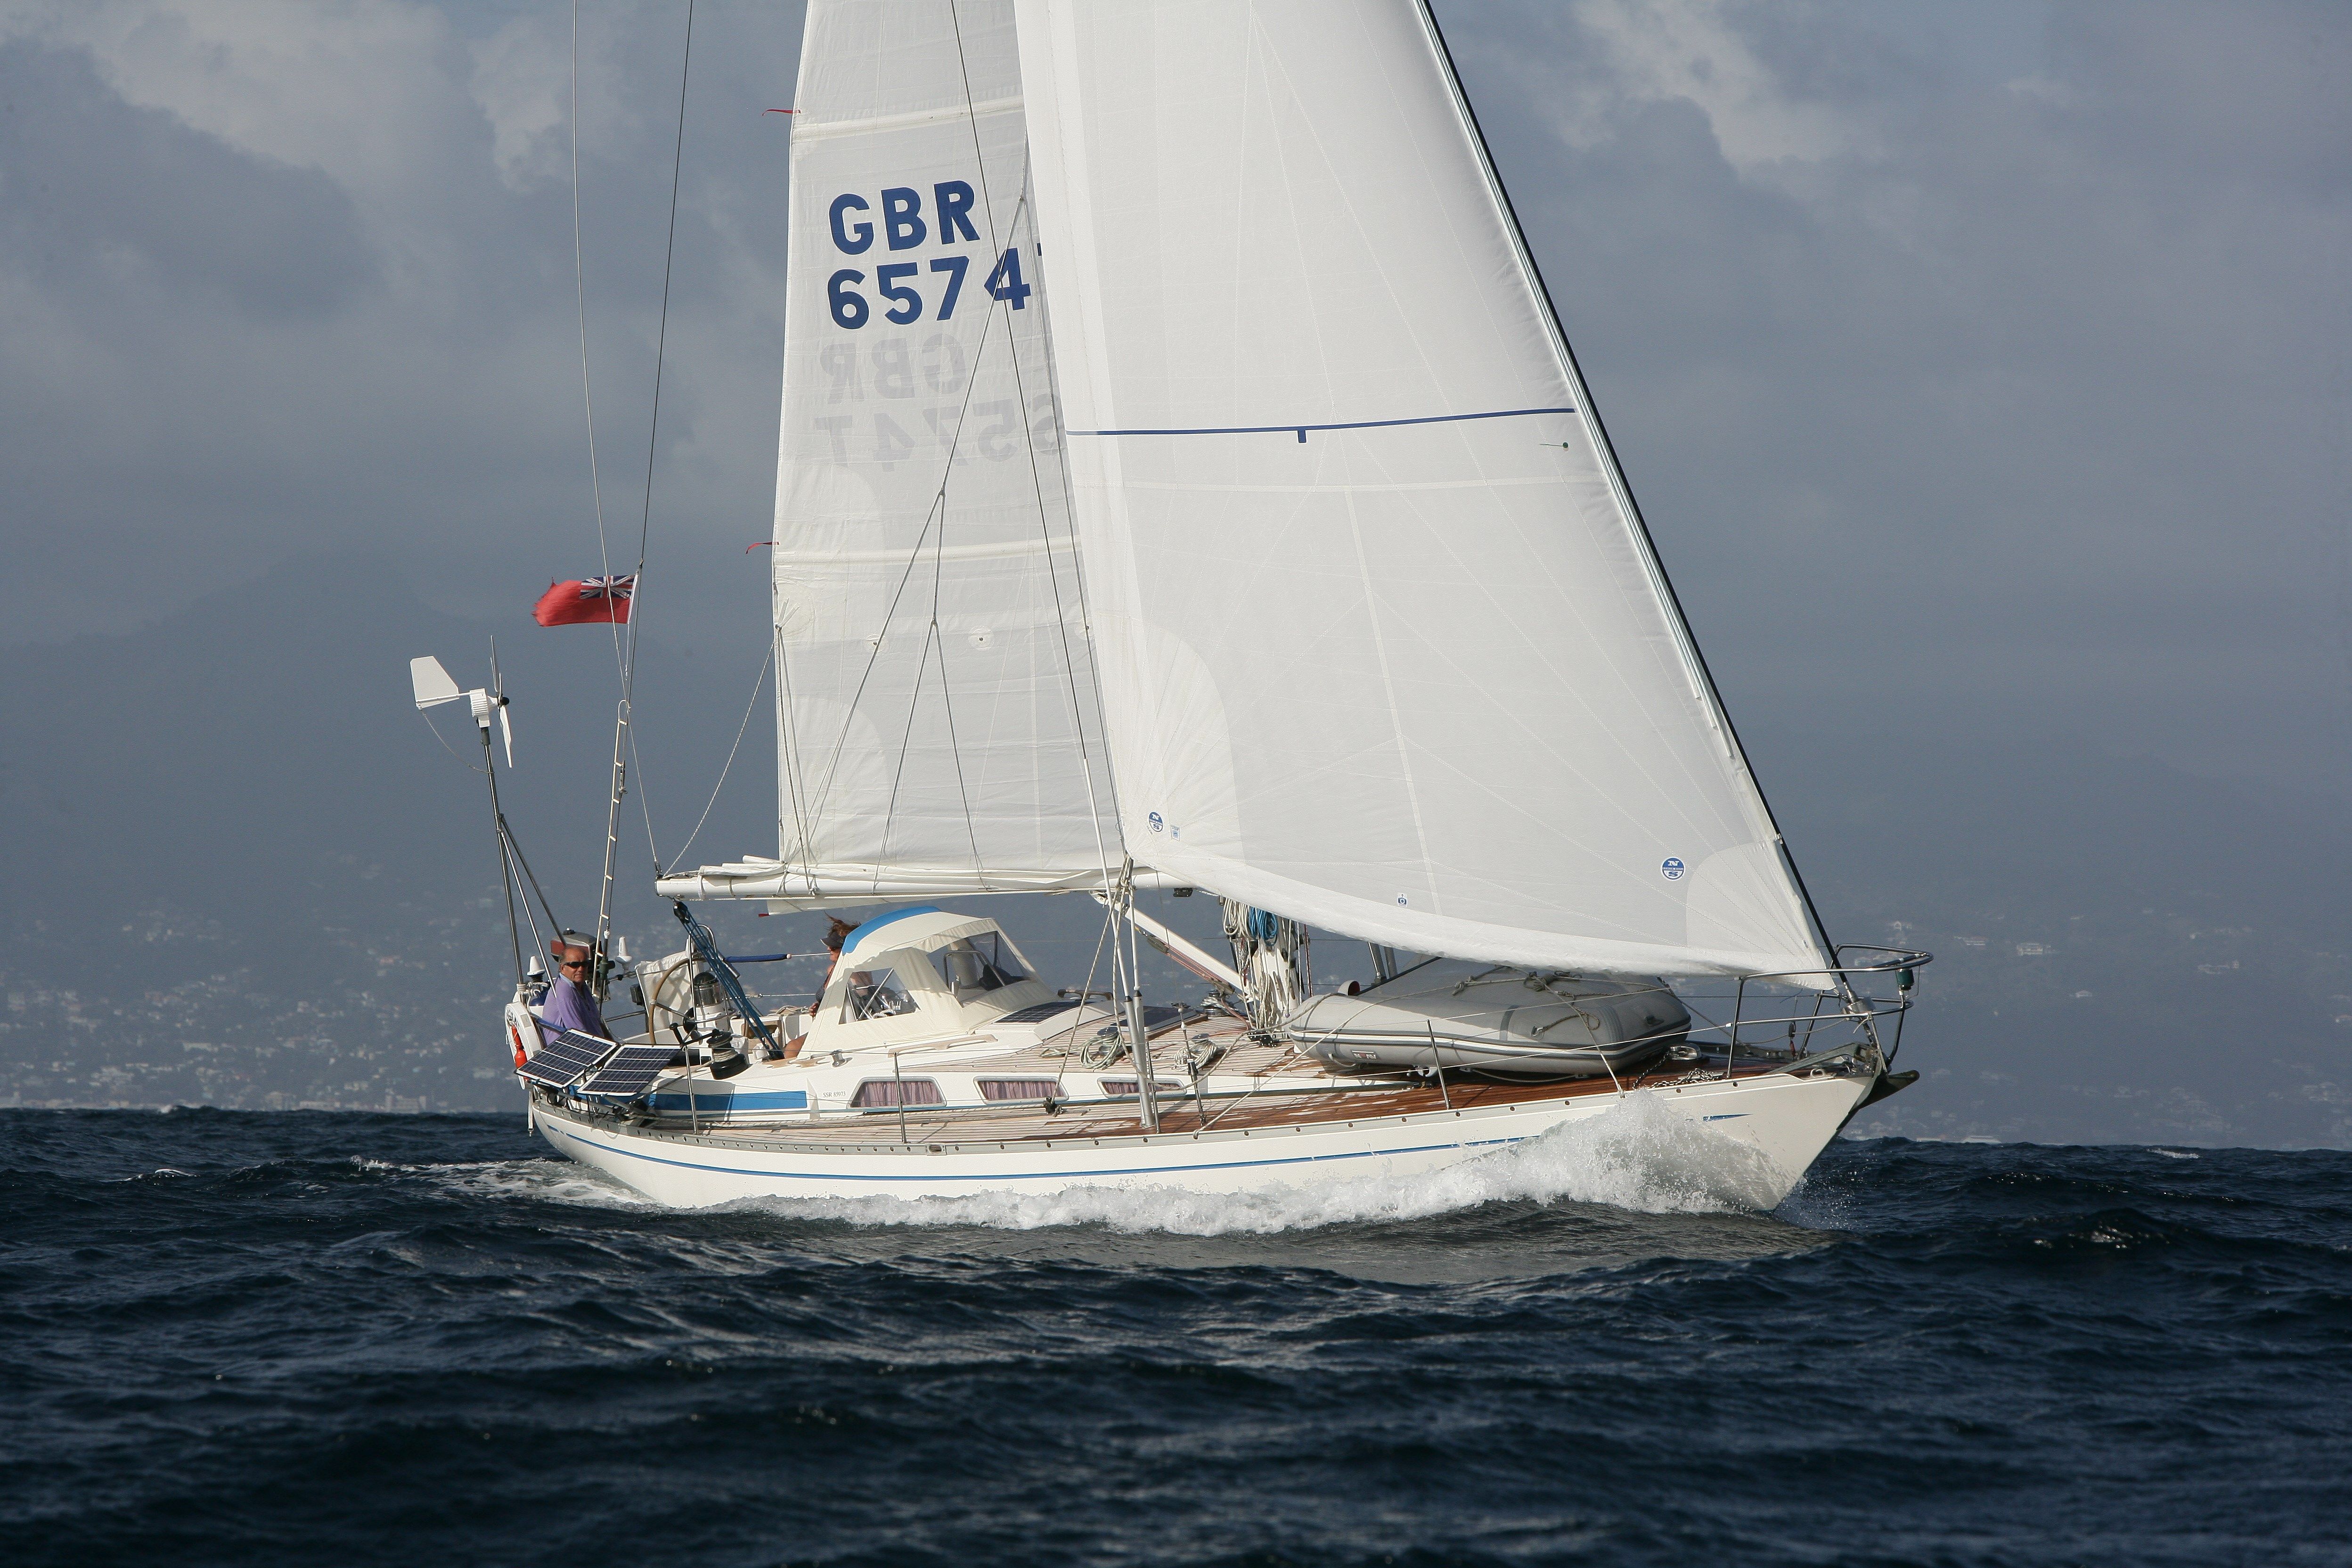 swan yachts for sale uk